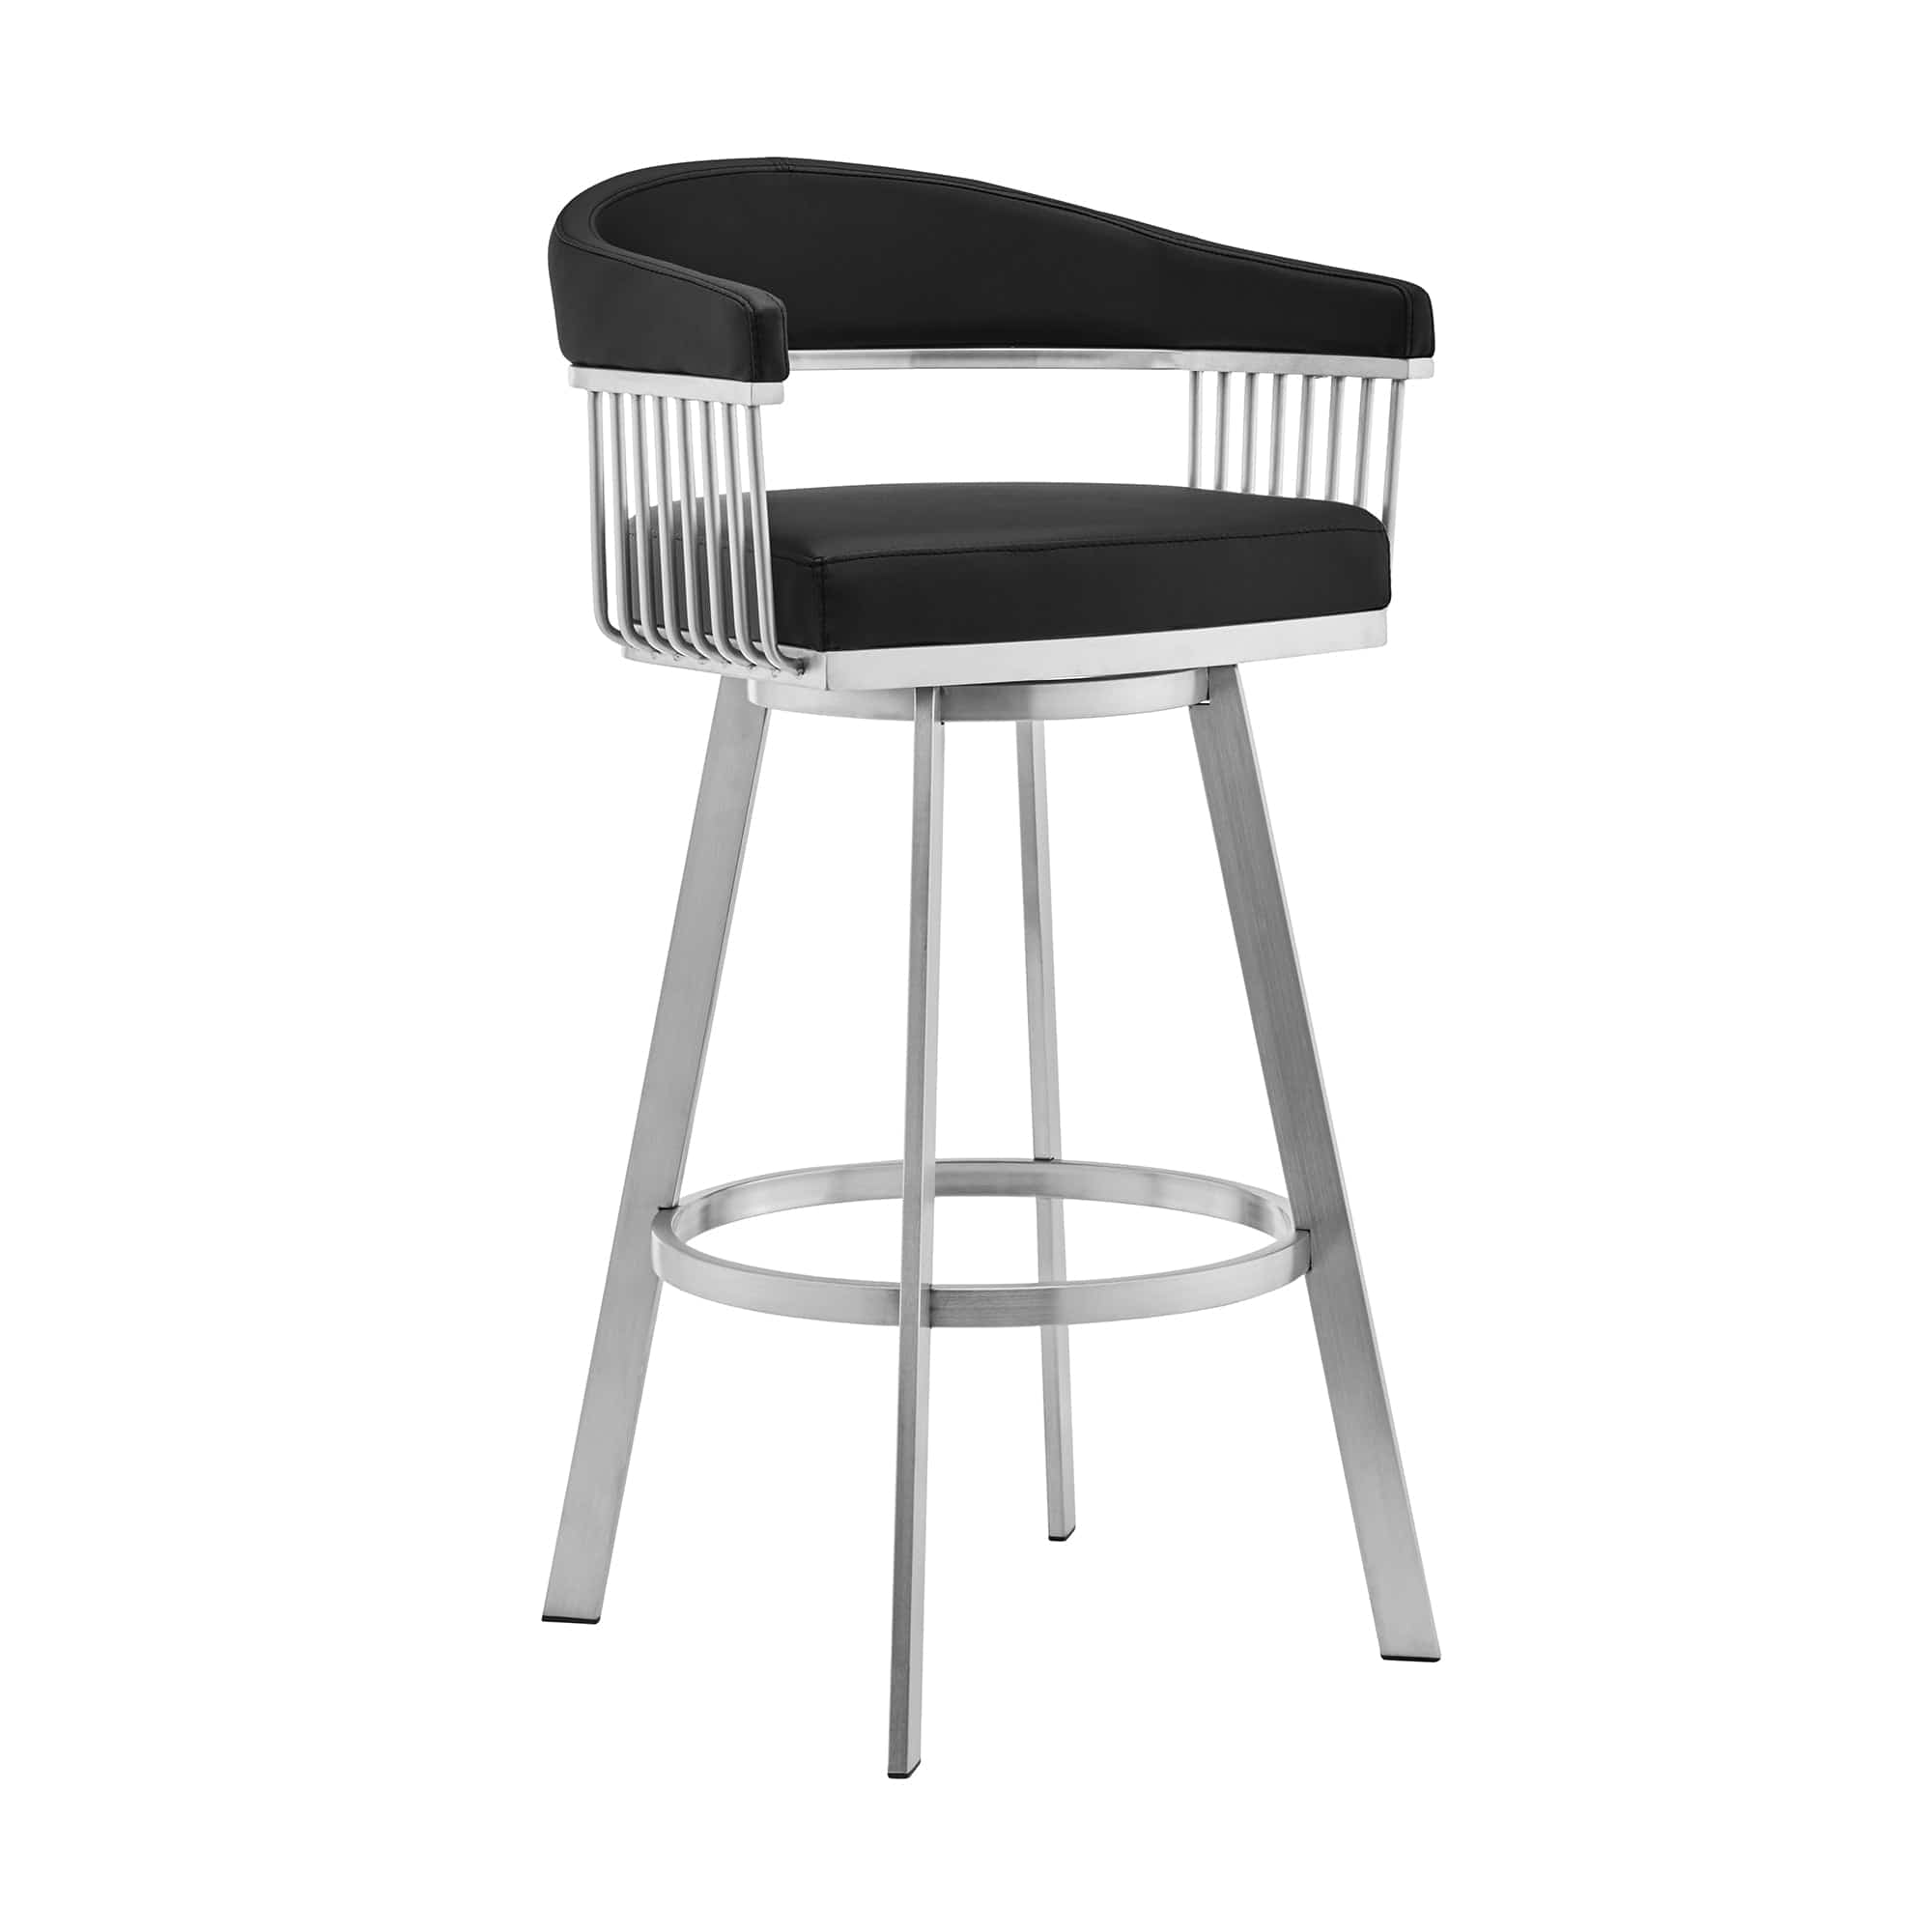 Armen Living Barstool Black Faux Leather and Brushed Stainless Steel Swivel Bar Stool Armen Living - Chelsea 30" Bar Height Swivel Bar Stool in Silver finish and White Faux Leather | LCCSBASLWH30